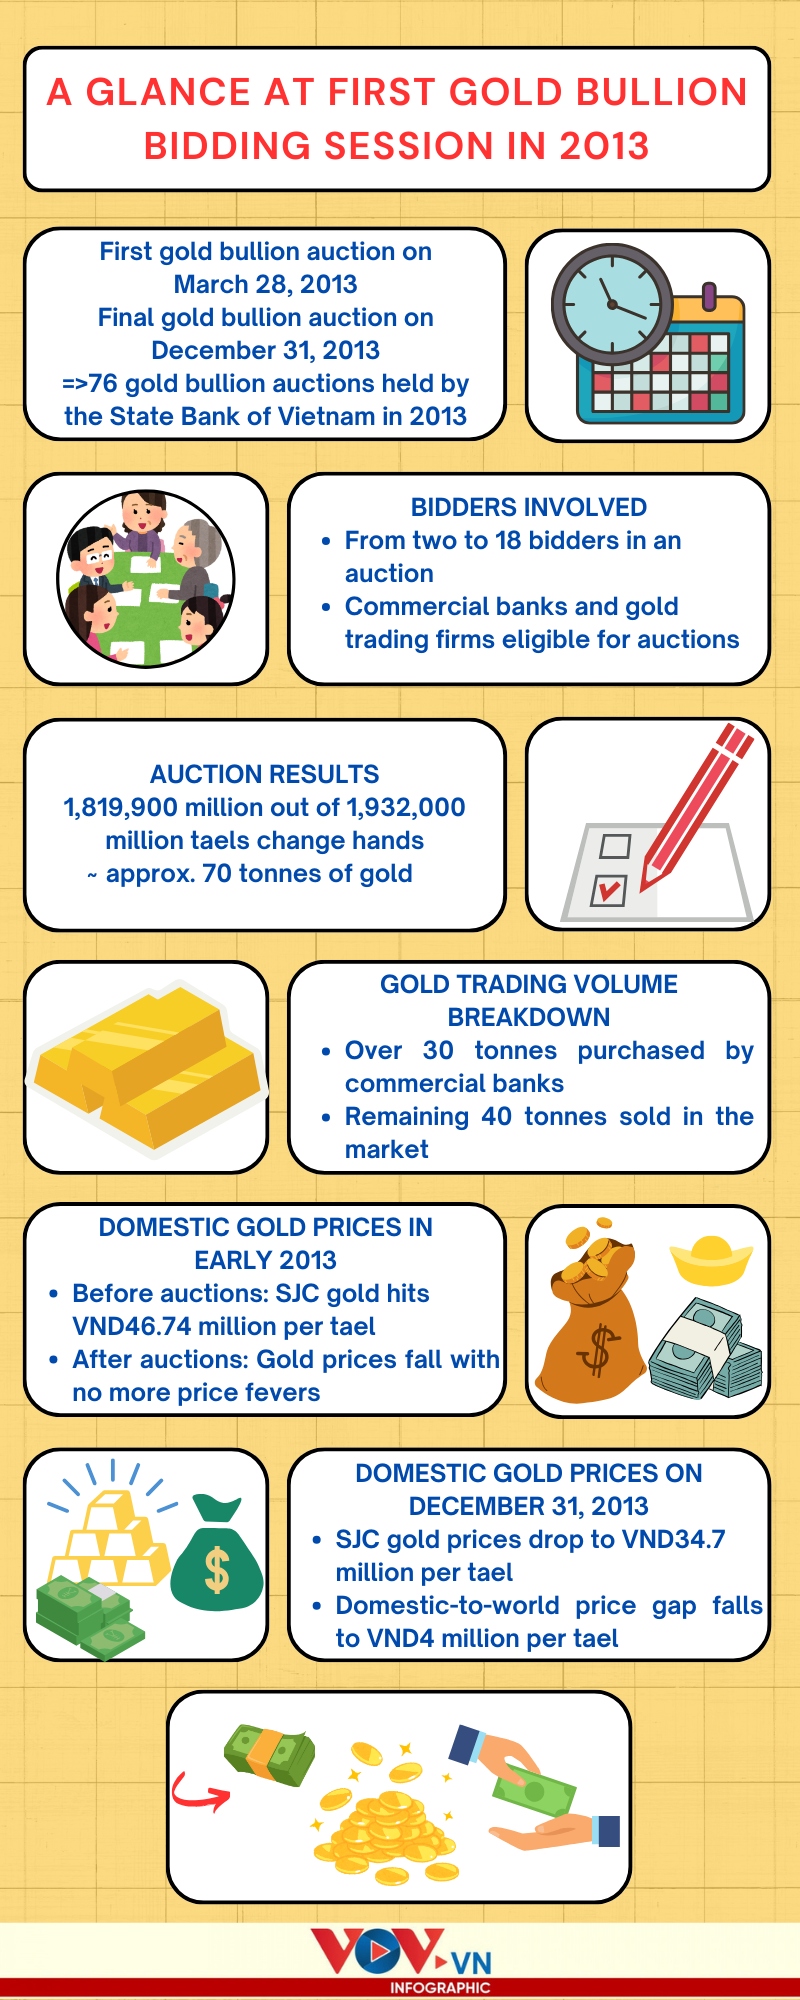 a look back at first gold bullion bidding session 11 years ago picture 1